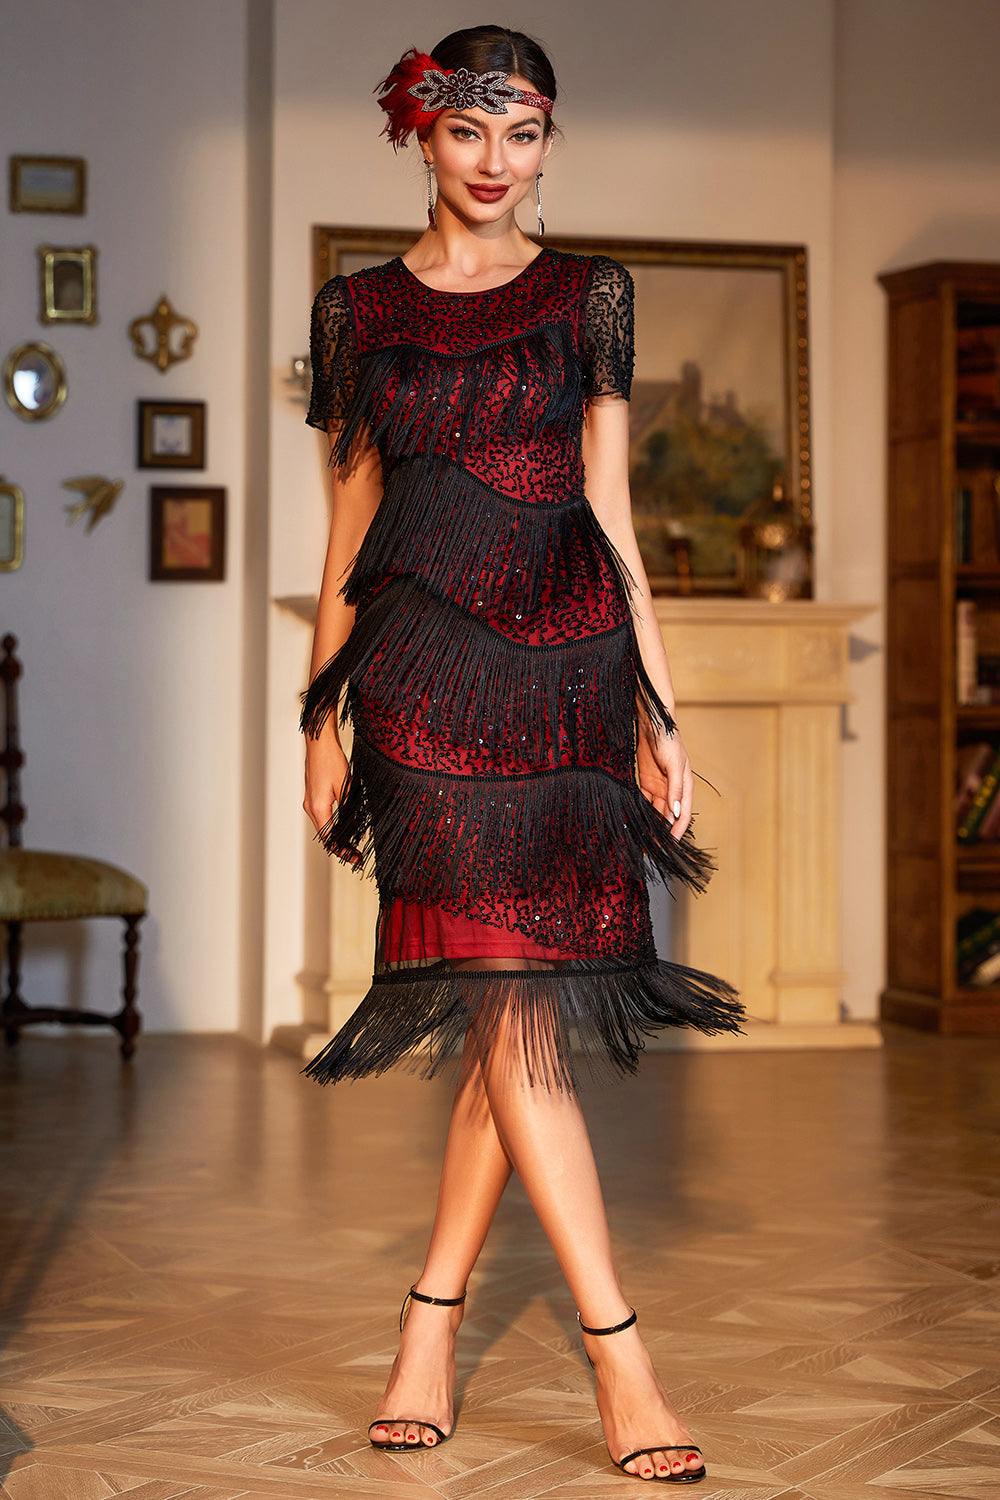 Burgundy Sparkly Sequined Fringed Flapper Dress with Accessories